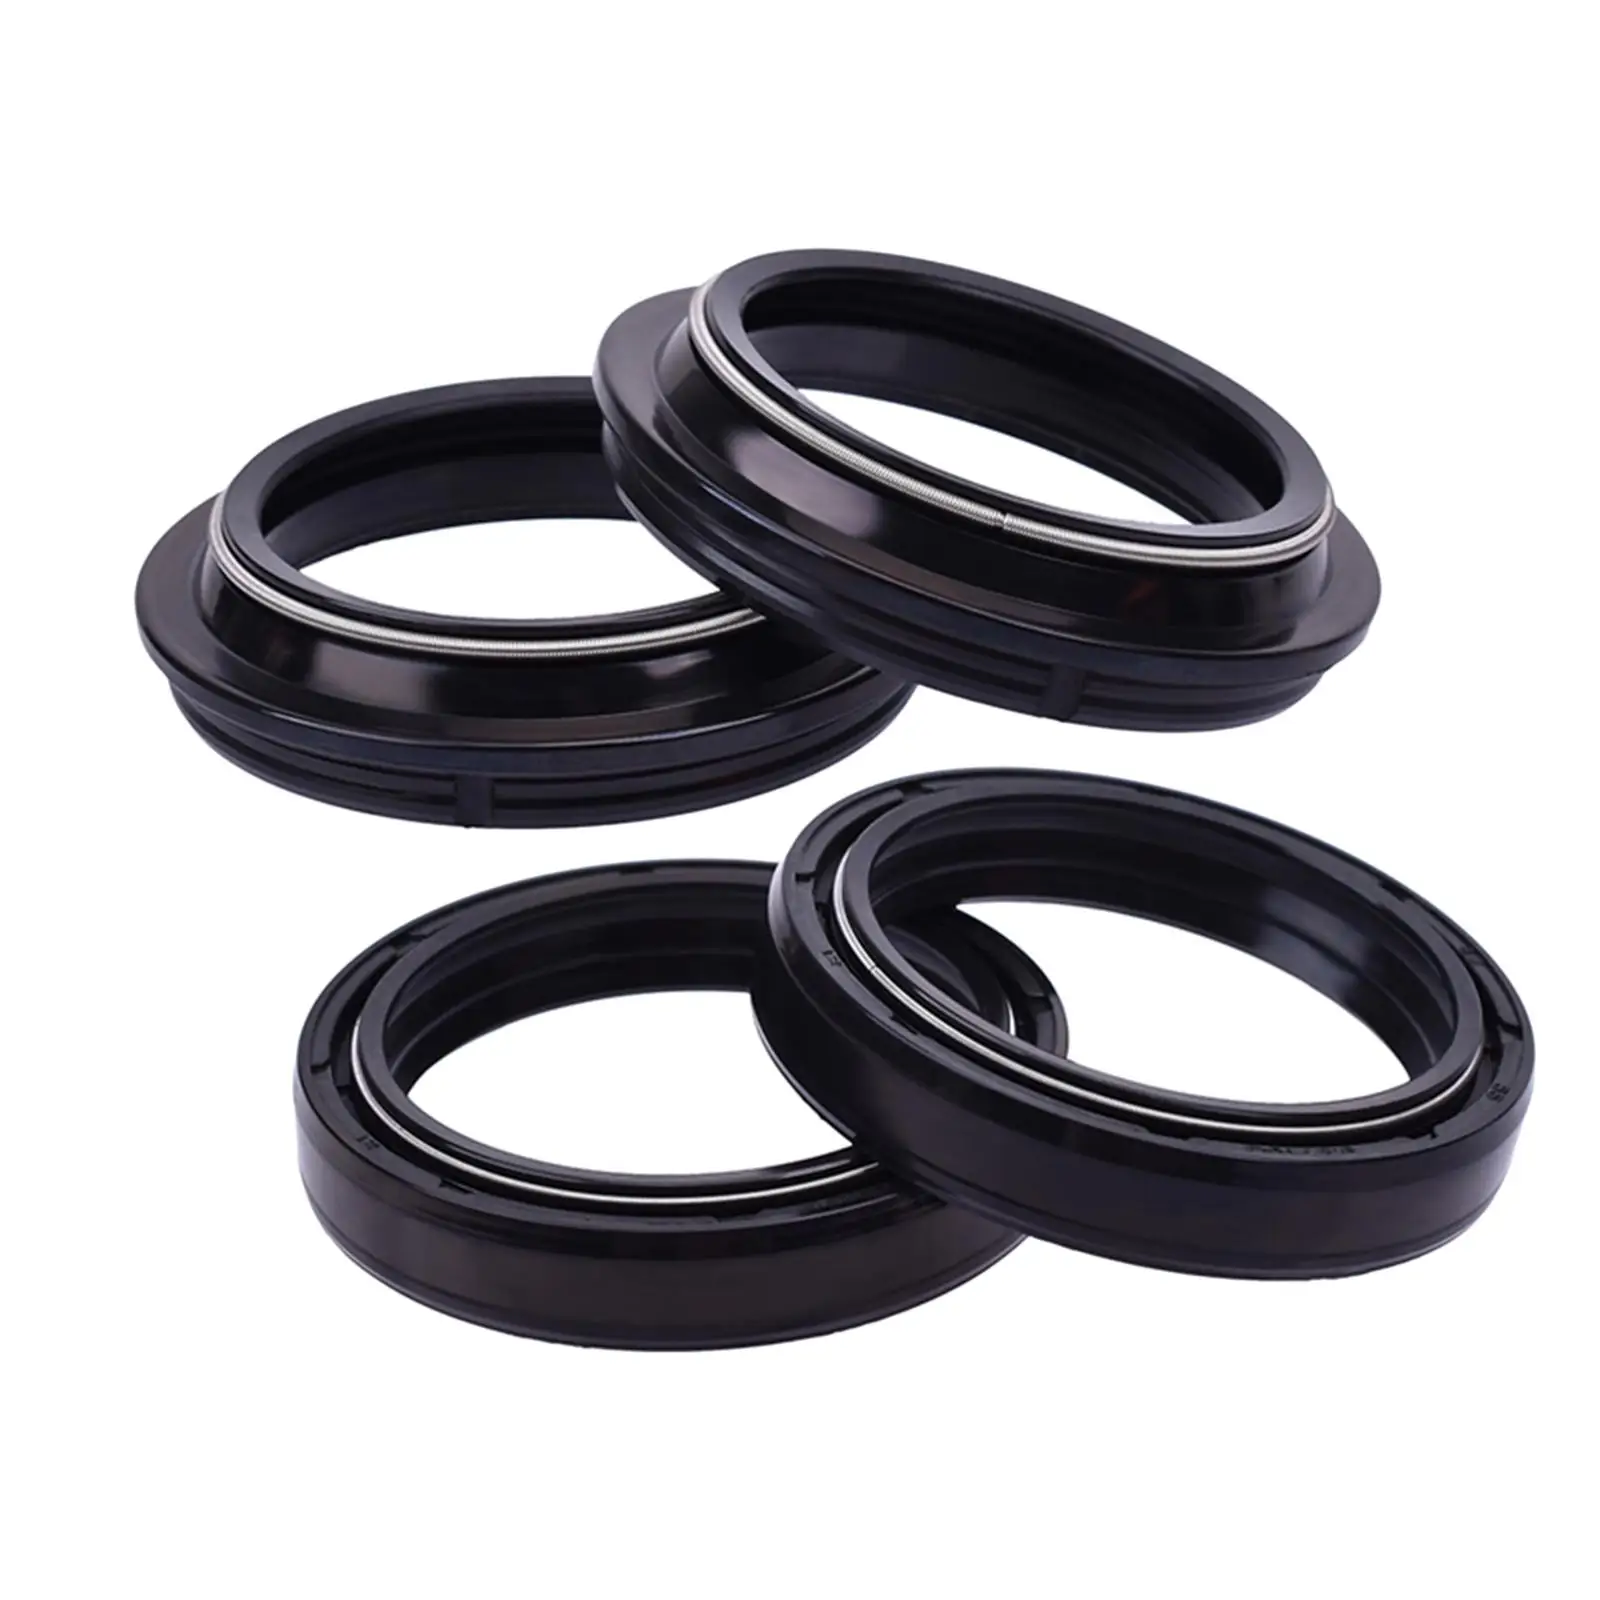 Fork and Dust Seal Kit Accessories for Suzuki RM125 Rm-z450 Dr-z400SM